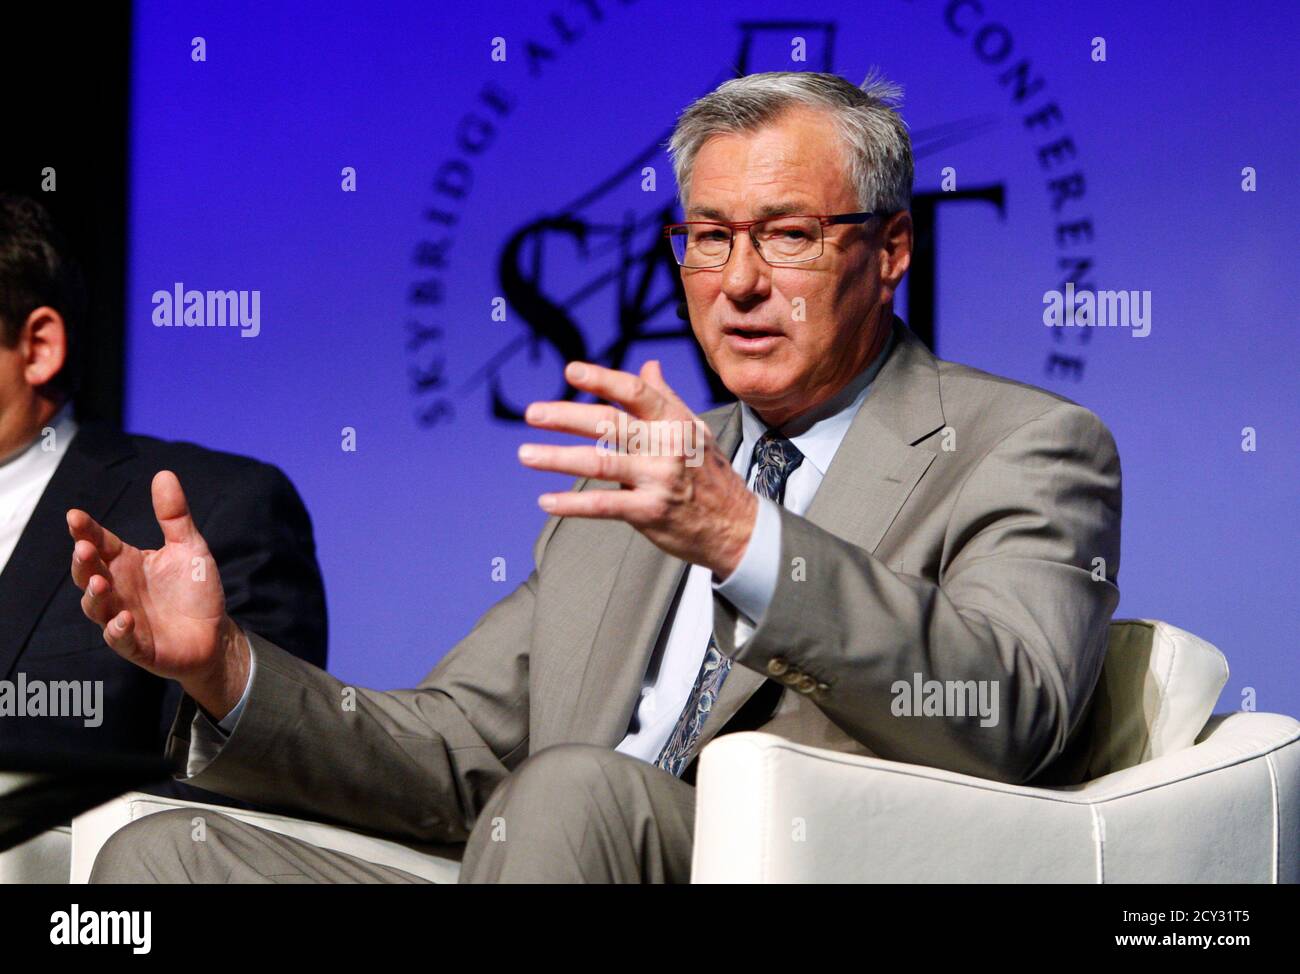 Eric Sprott, chief investment officer and senior portfolio manager for Sprott Asset Management, participates in a panel discussion during the Skybridge Alternatives (SALT) Conference in Las Vegas, Nevada May, 9, 2012. SALT brings together public policy officials, capital allocators, and hedge fund managers to discuss financial markets. REUTERS/Steve Marcus (UNITED STATES - Tags: BUSINESS) Stock Photo